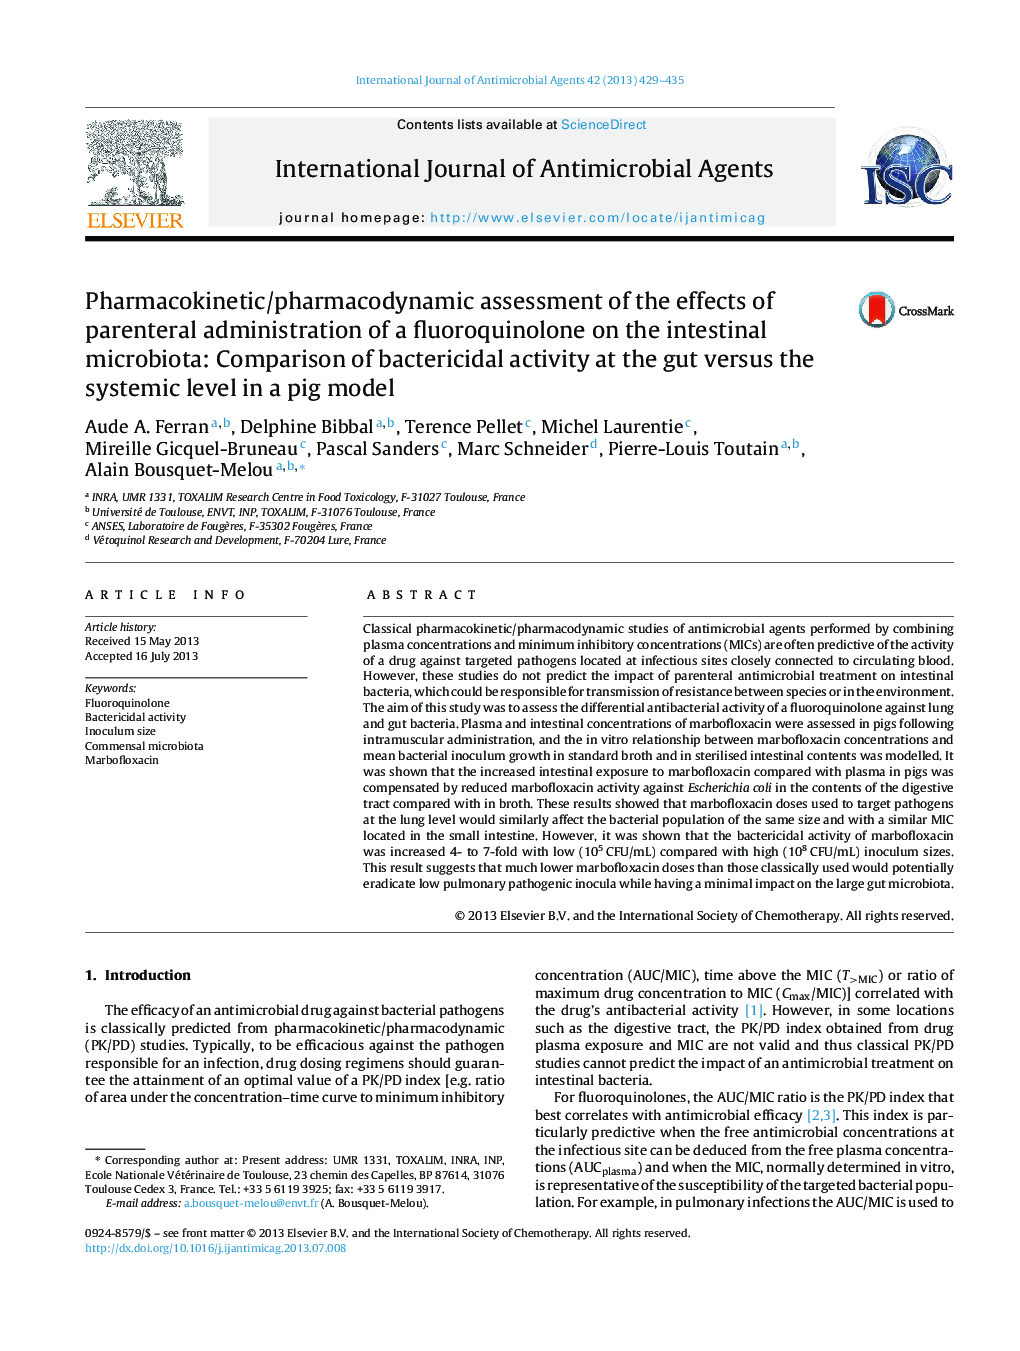 Pharmacokinetic/pharmacodynamic assessment of the effects of parenteral administration of a fluoroquinolone on the intestinal microbiota: Comparison of bactericidal activity at the gut versus the systemic level in a pig model